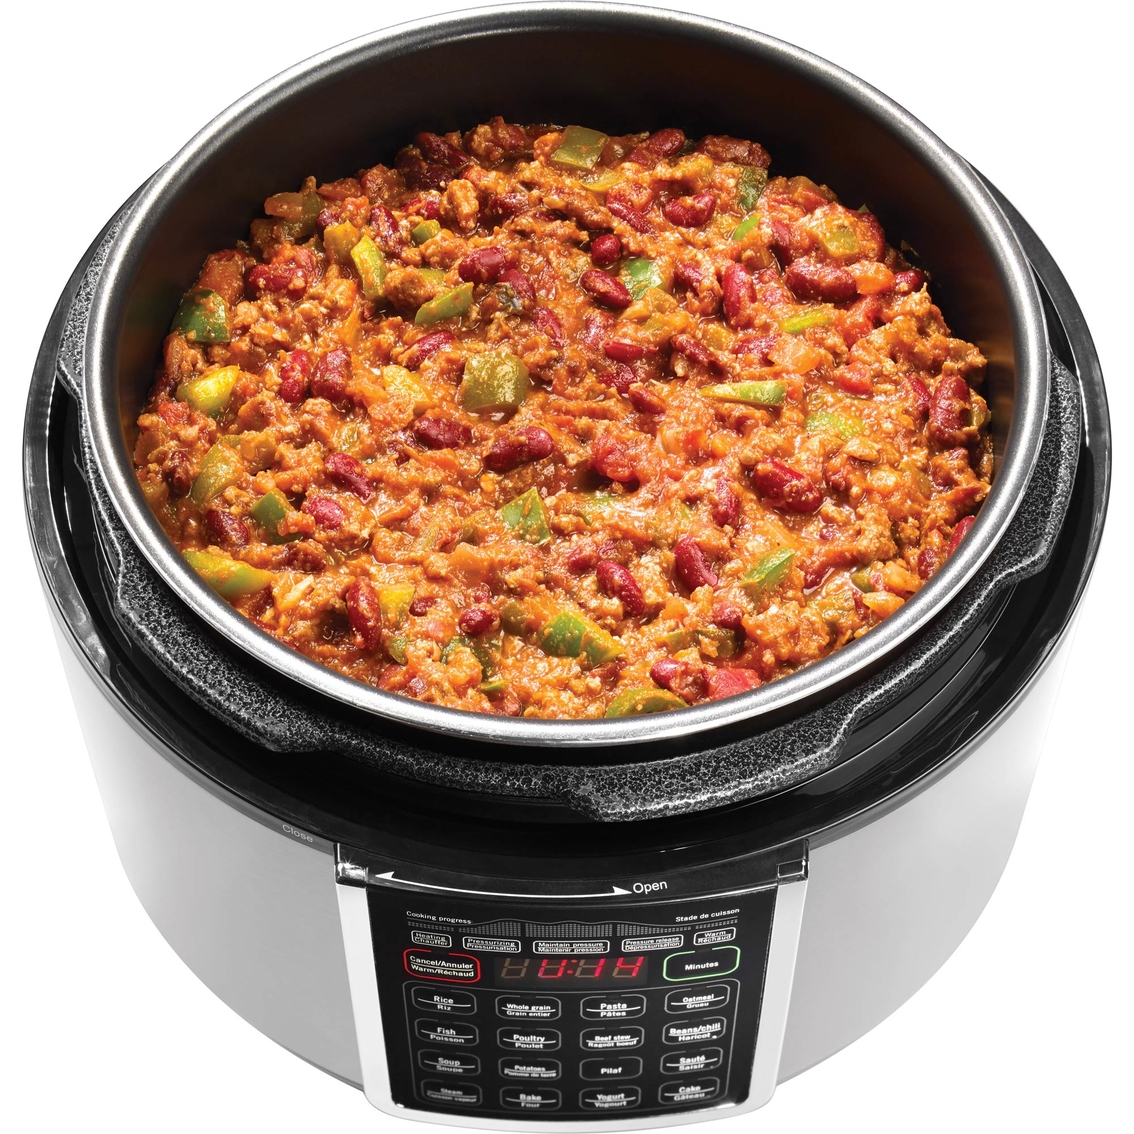 Starfrit Electric Pressure Cooker - Image 6 of 10